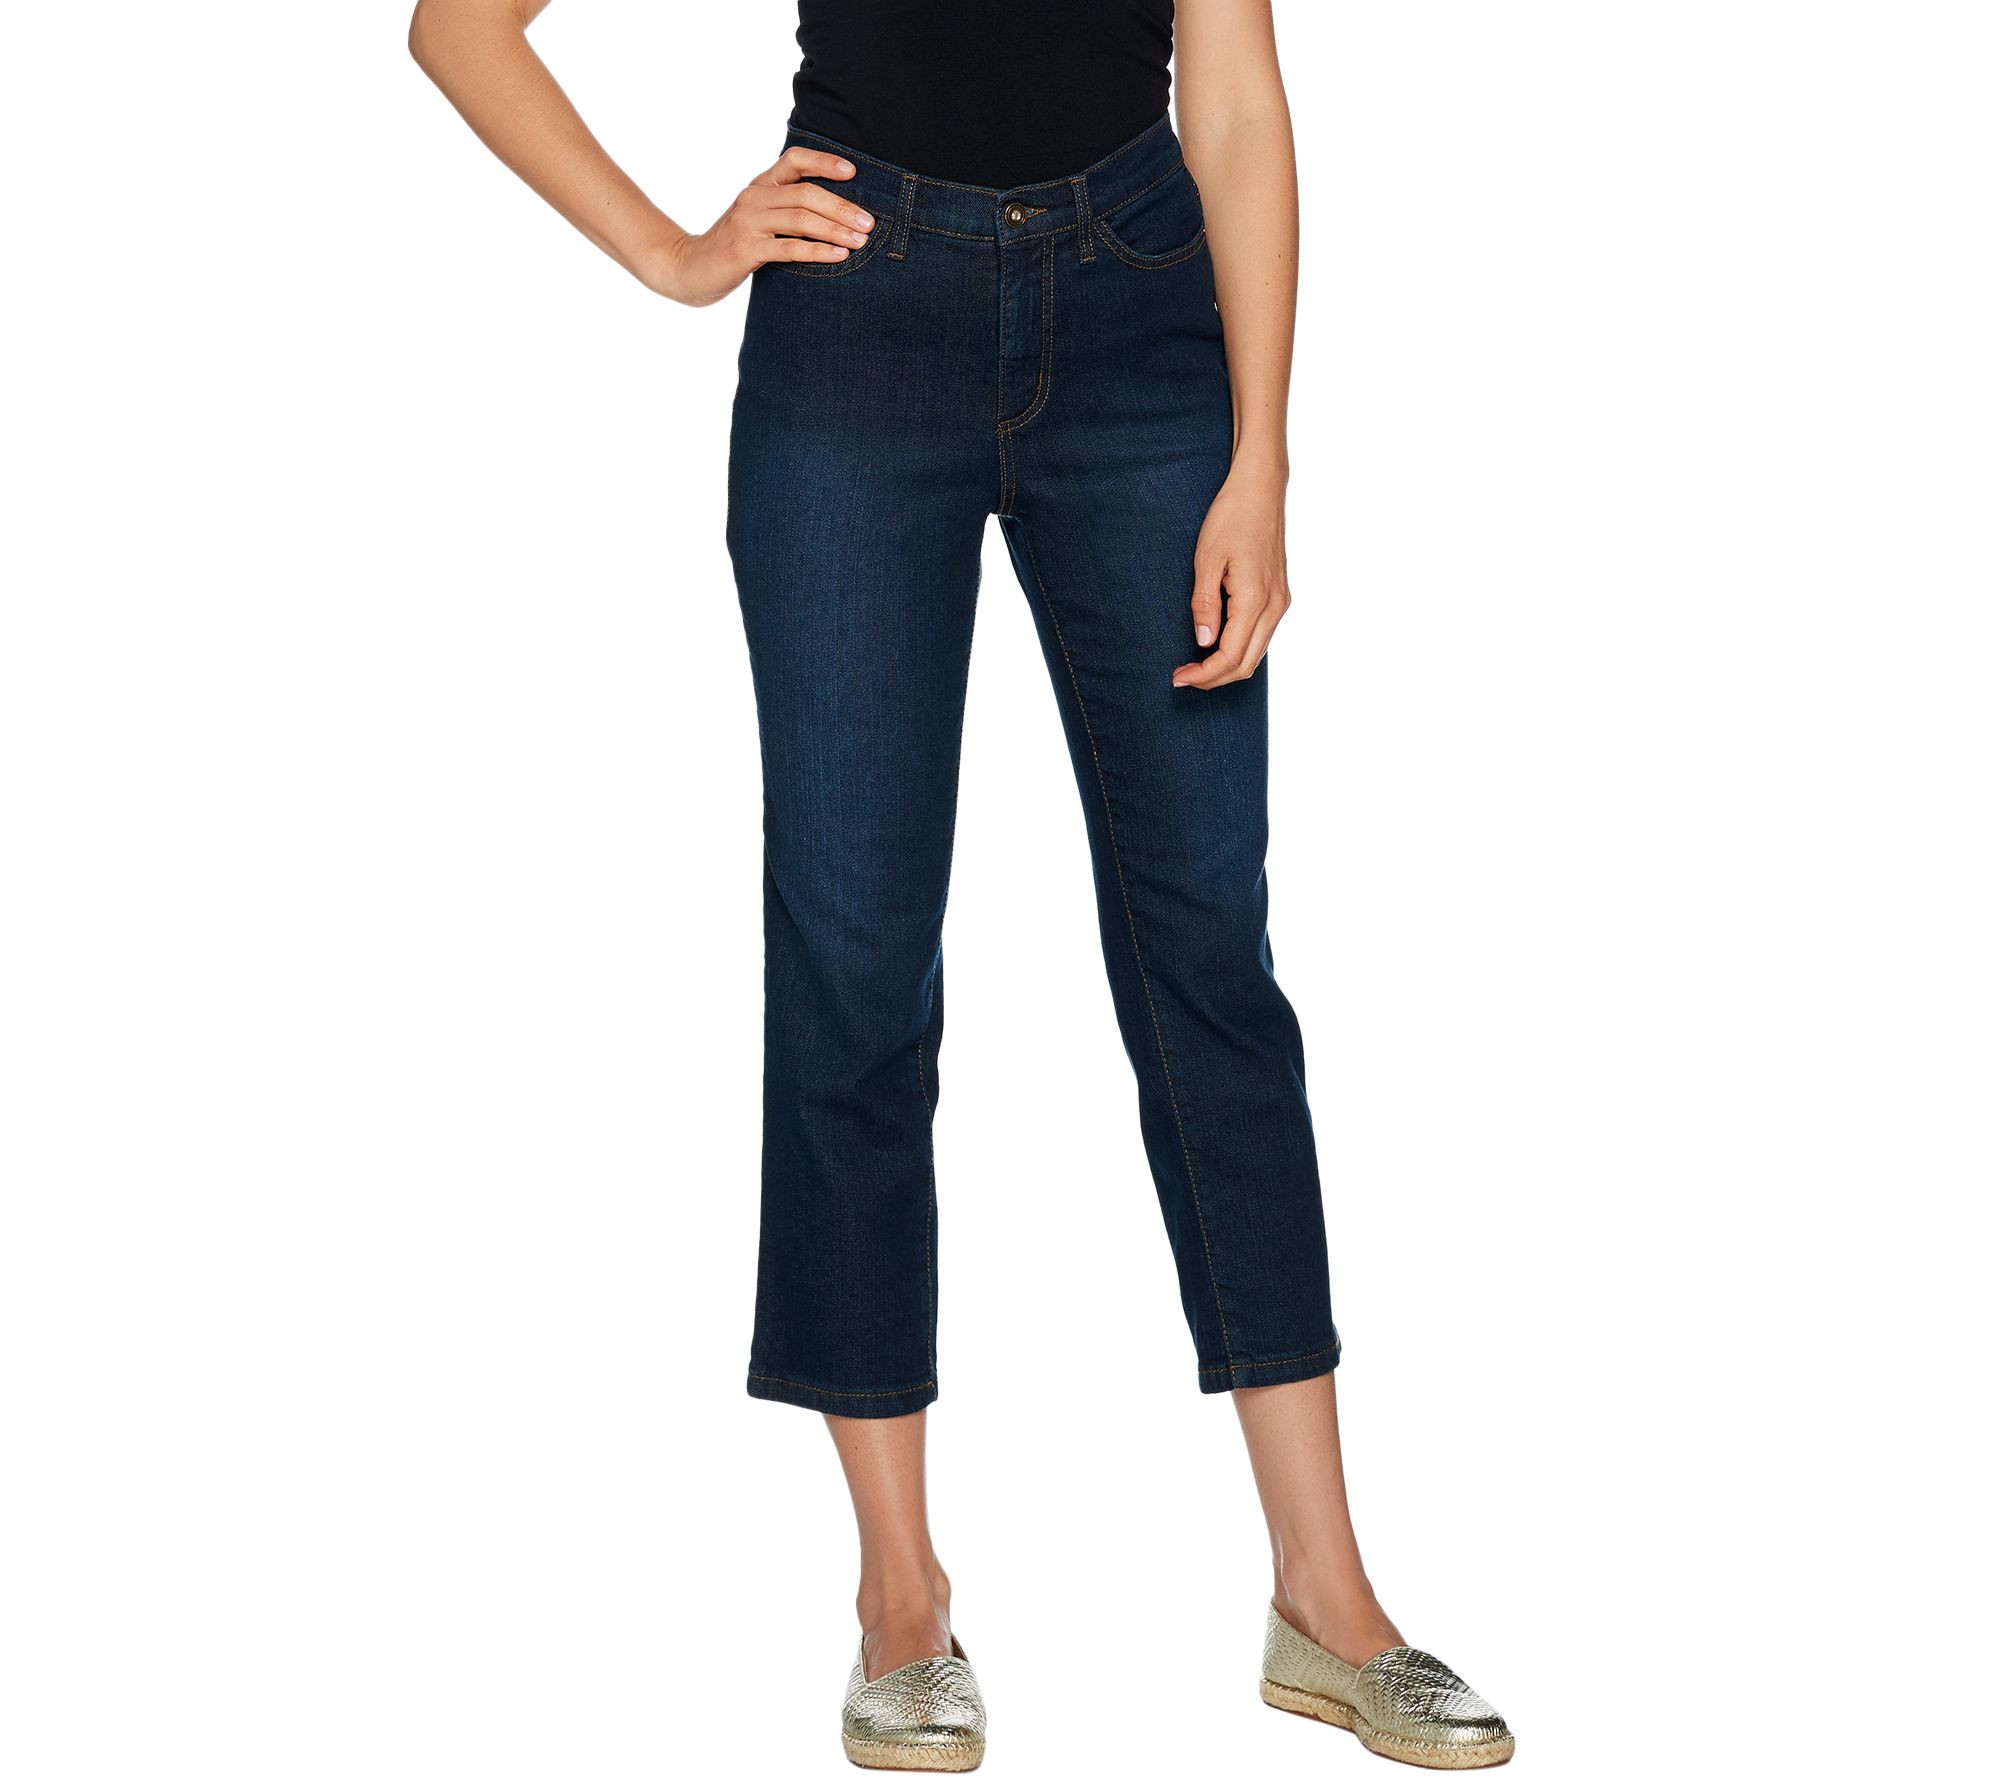 qvc denim and company distressed jeans